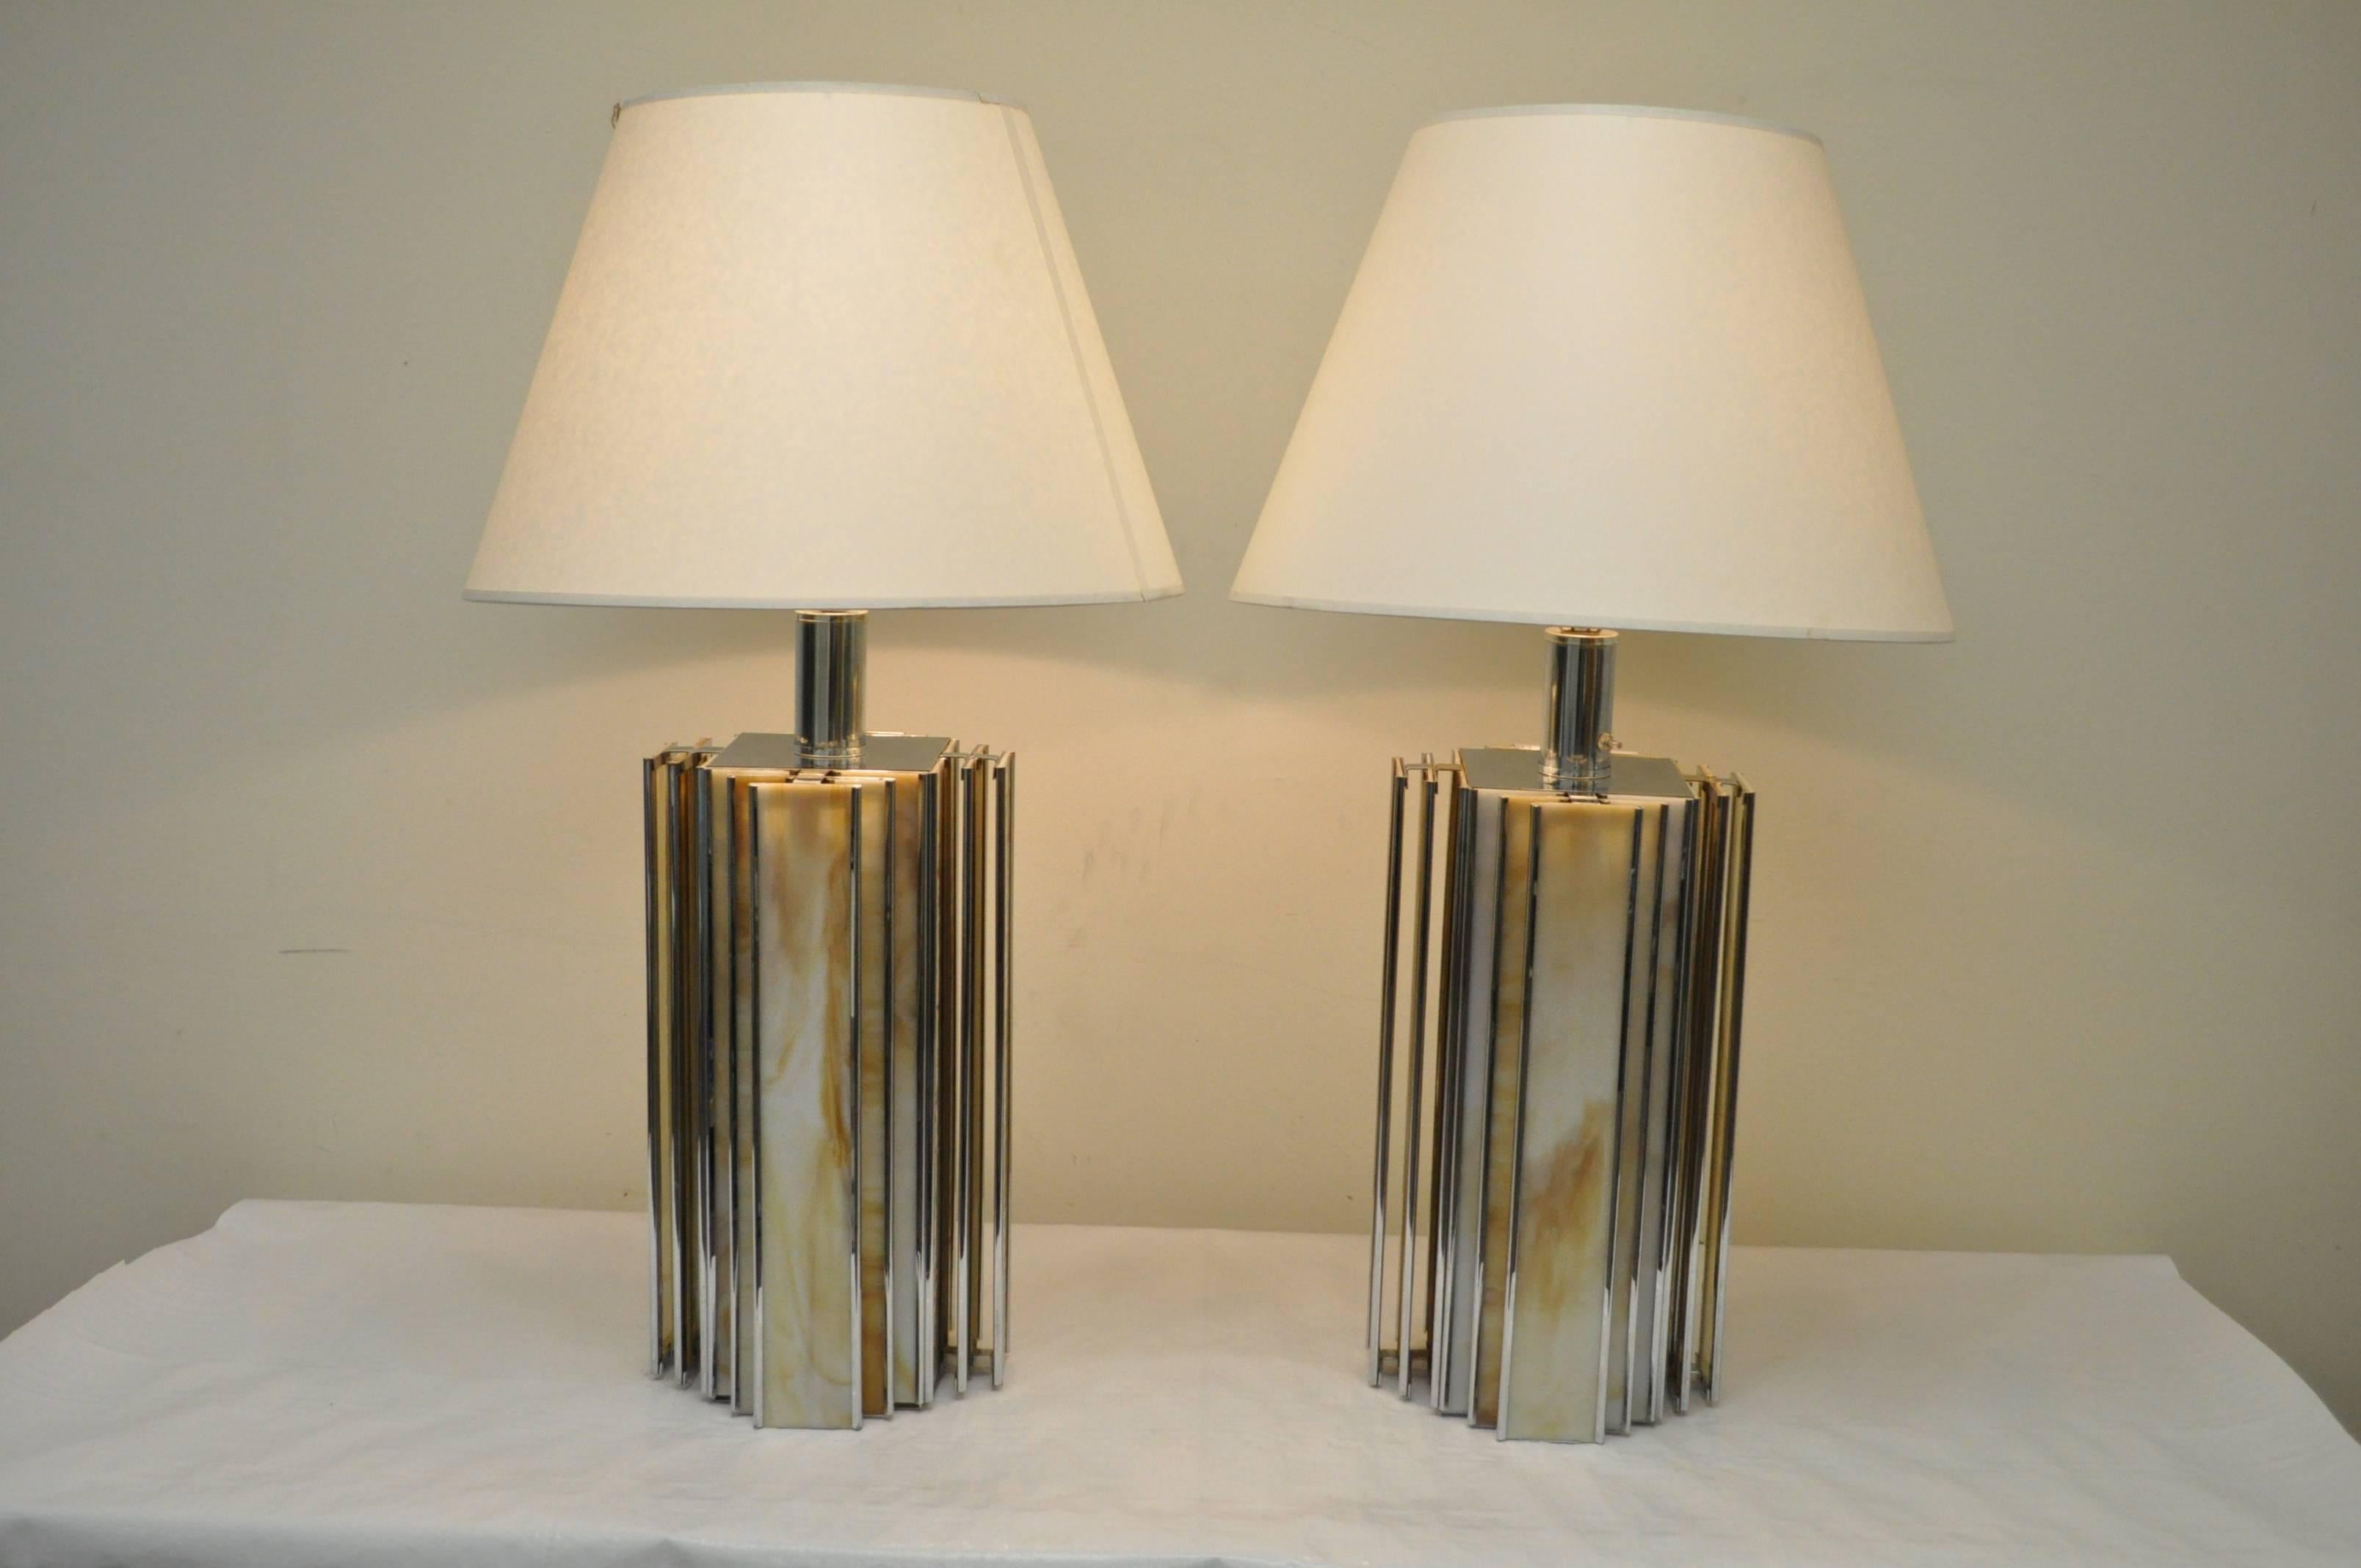 Pair of vintage chrome and slag glass table lamps. The lamps have a sleek modern design with Art Deco inspired geometric lines, and are constructed of chrome frames with richly colored slag glass inserts. The bases light up to illuminate the